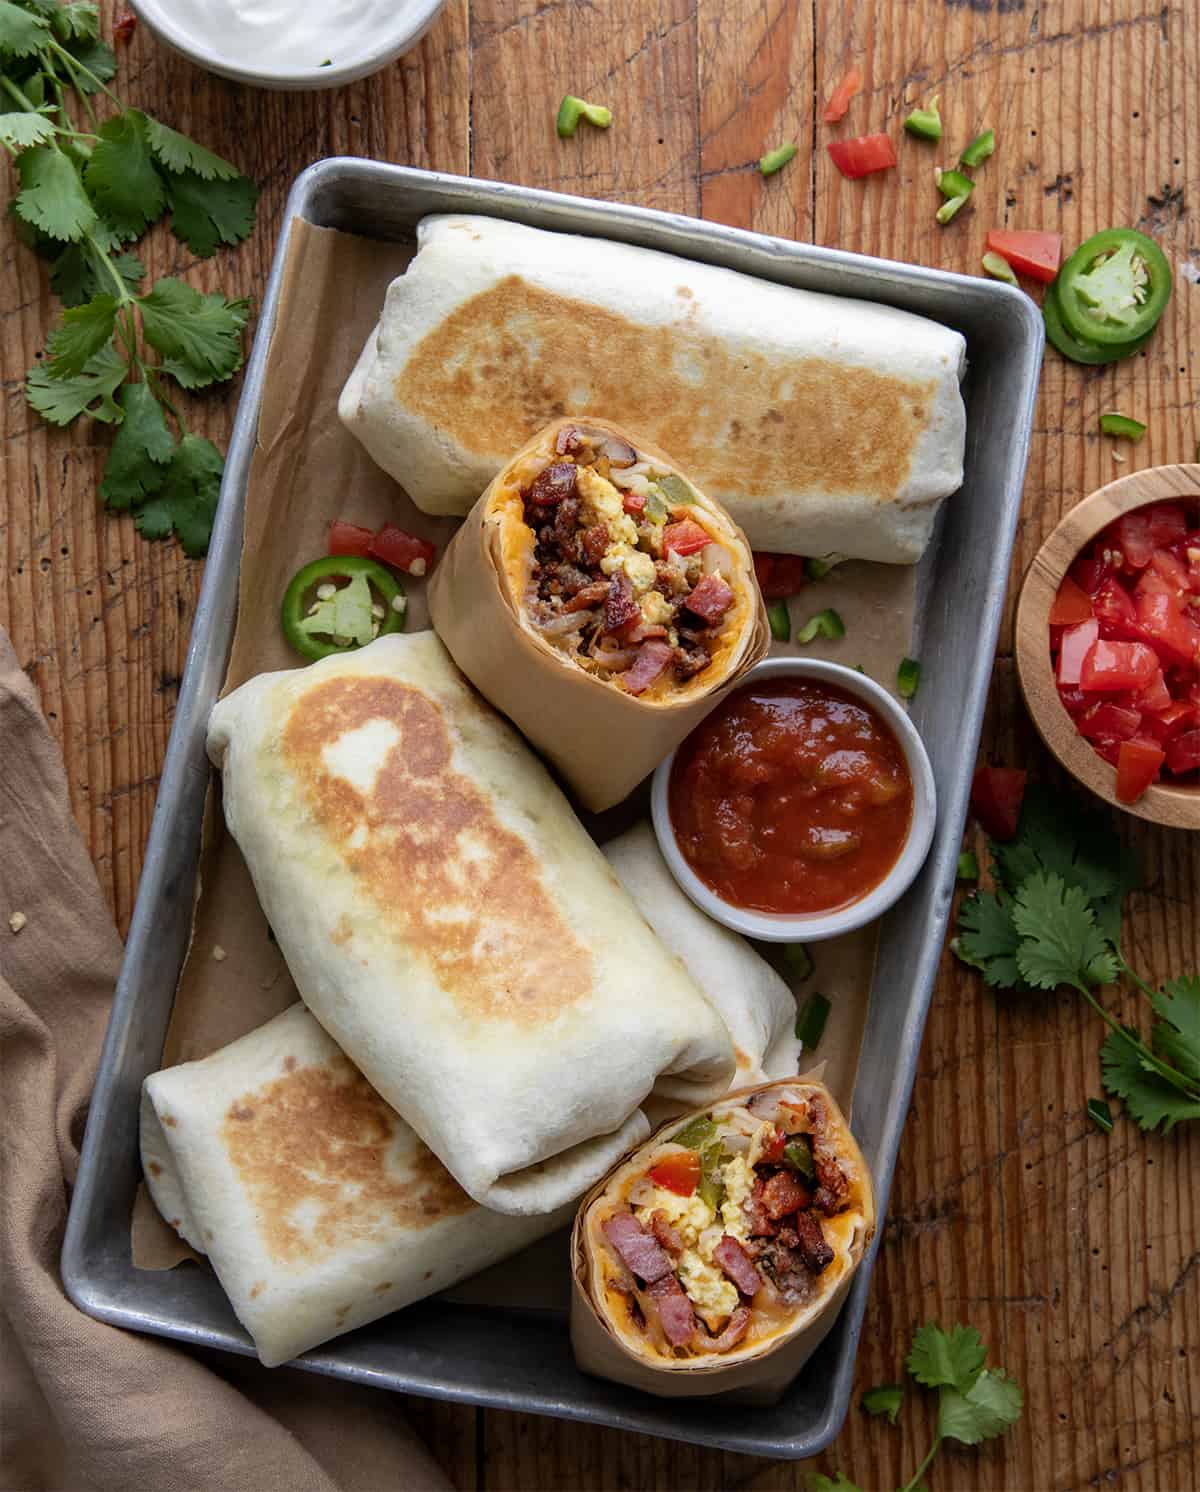 Cowboy Breakfast Burritos in a pan with one cut in half showing inside.